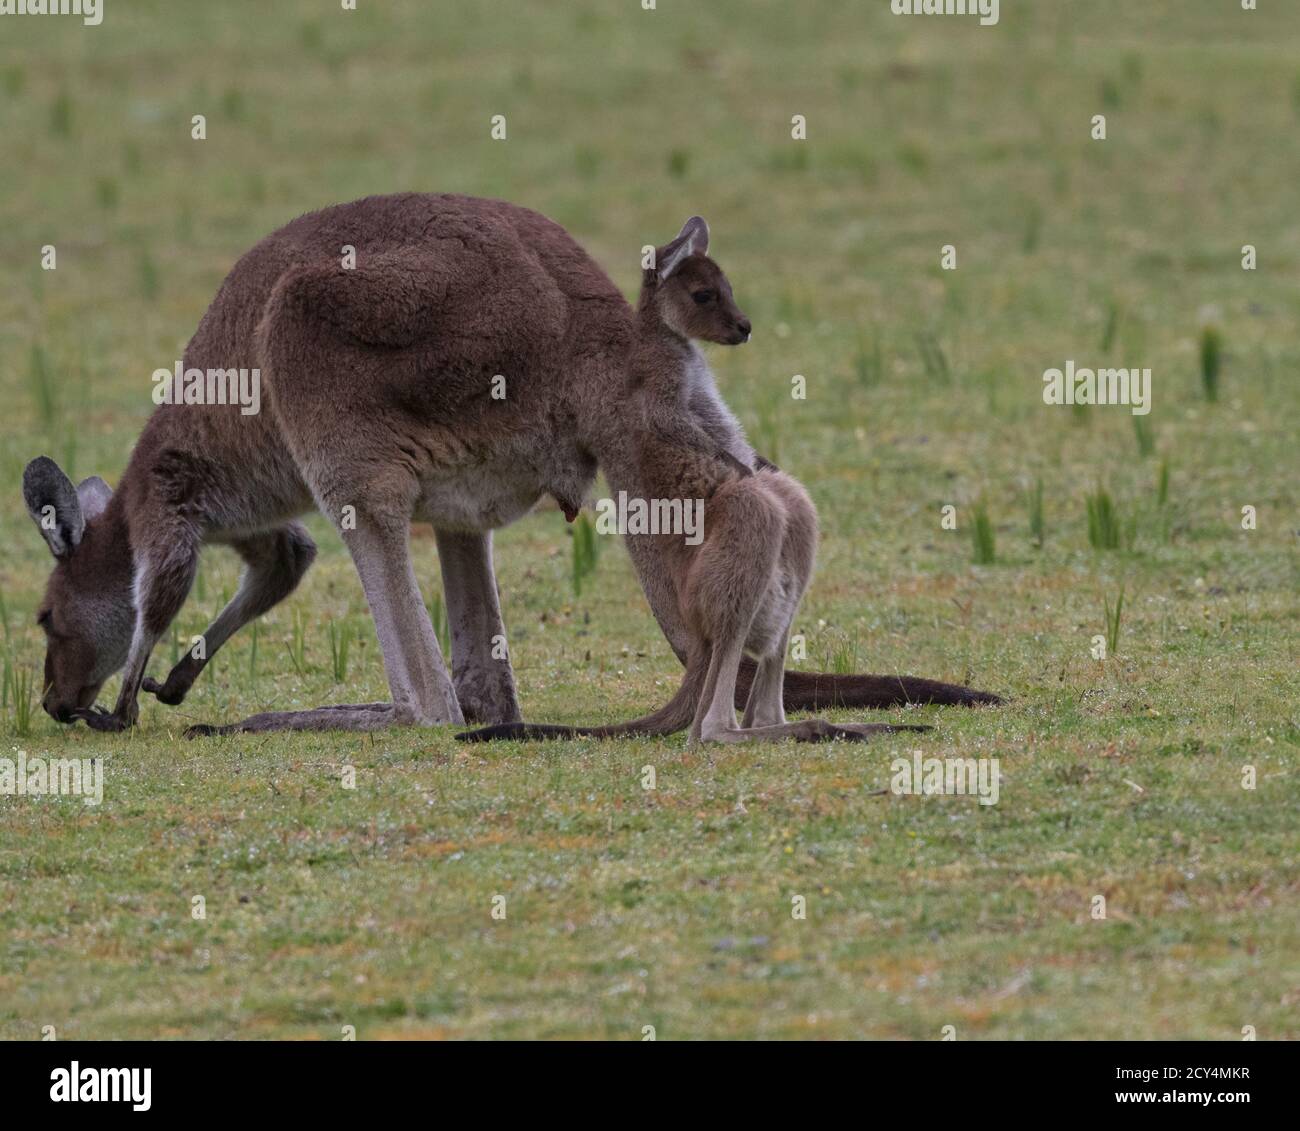 Conceptual, humorous perspective of baby kangaroo leanign on its own tail against mother in Yanchep National Park in Western Australia Stock Photo